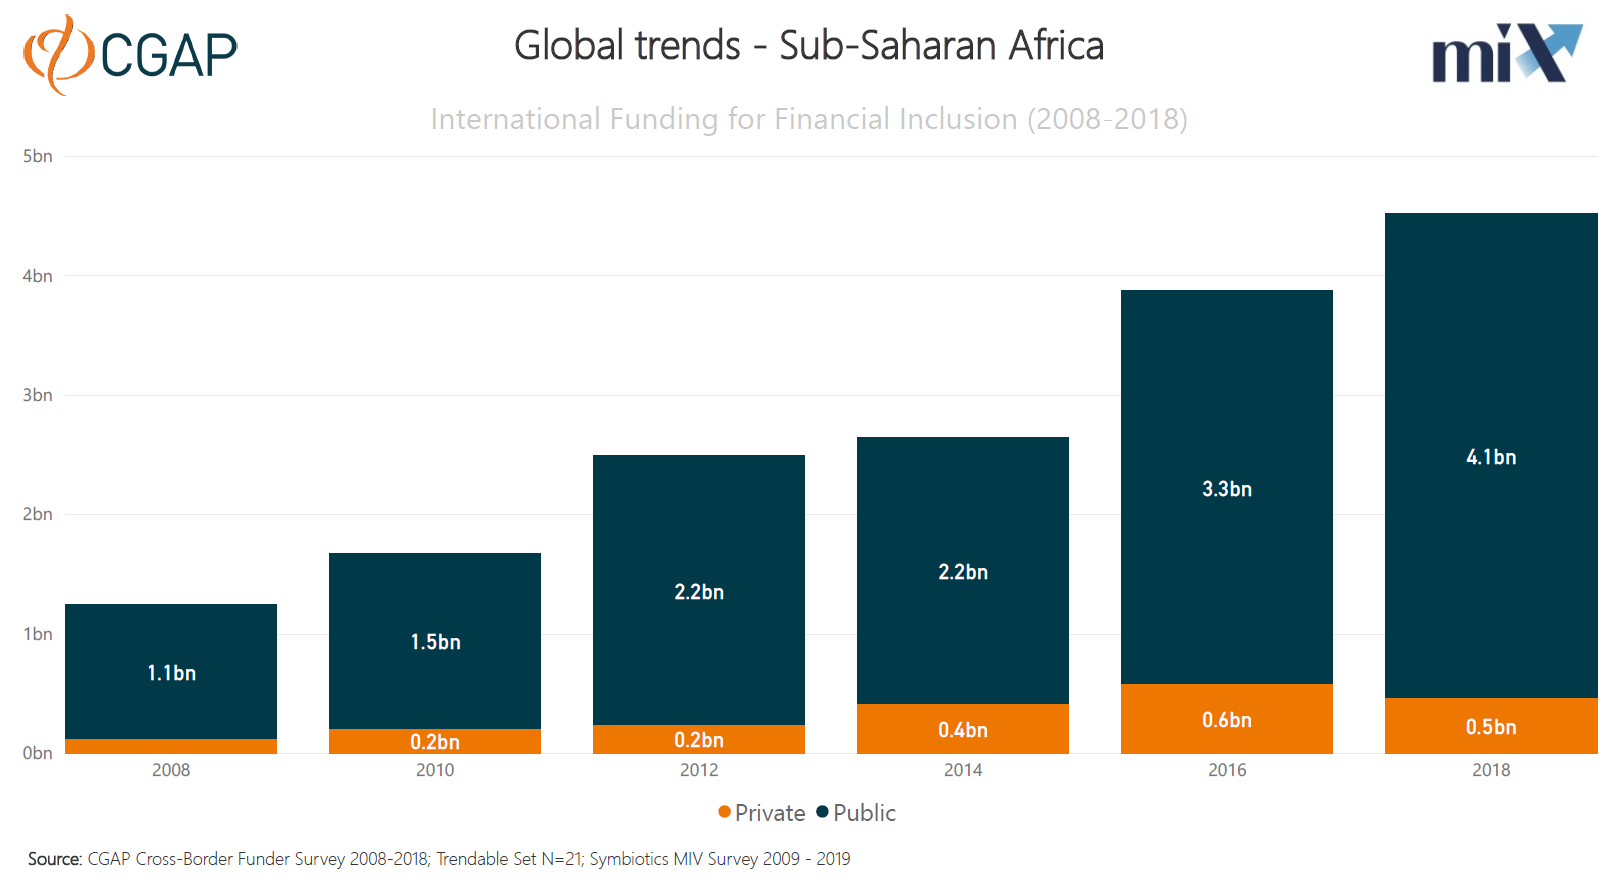 1. How much international funding is going to support financial inclusion in Sub-Saharan Africa?